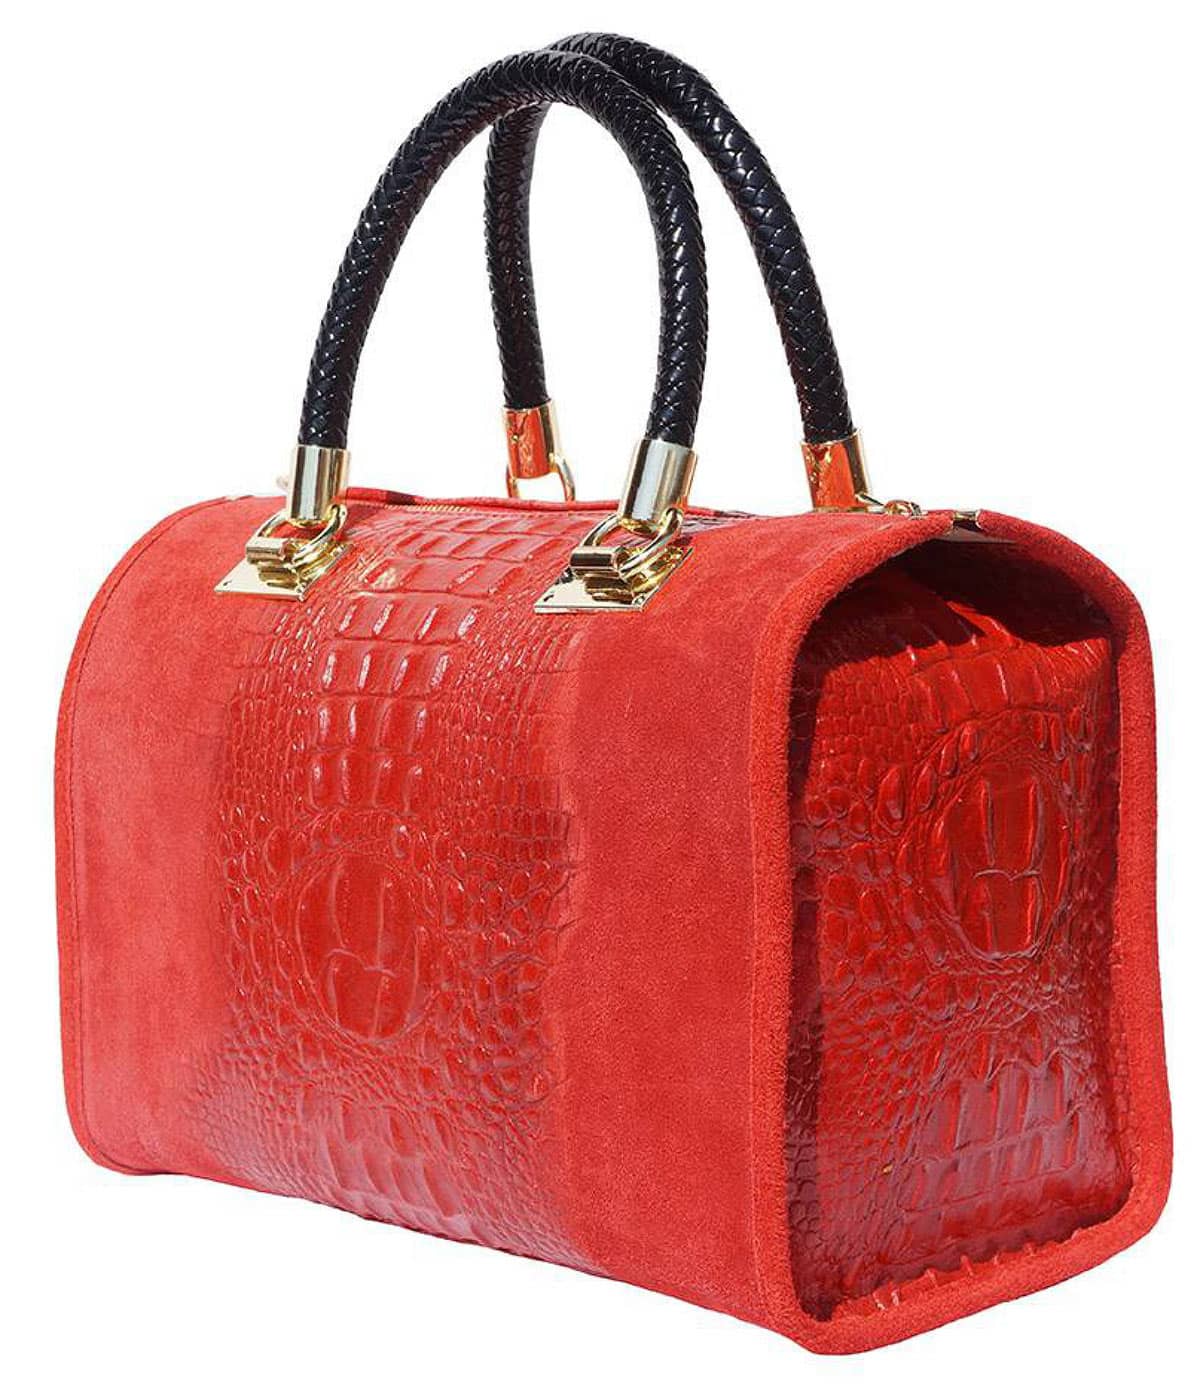 Private label Italian leather handbags made in Italy, manufacturers for